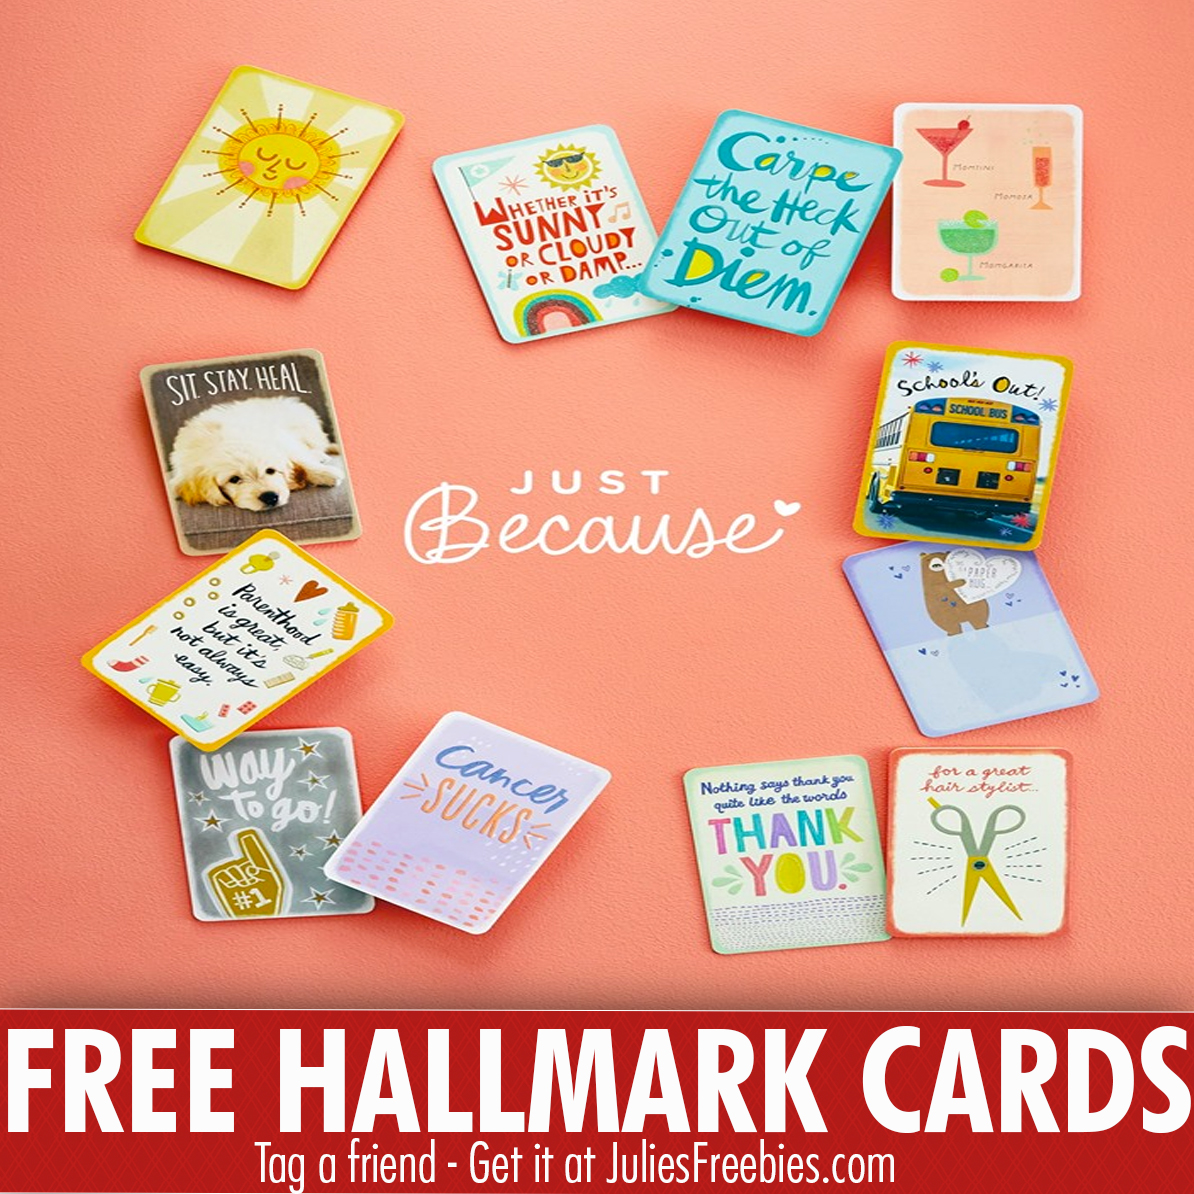 Free Hallmark "Just Because" Cards Today Only Julie's Freebies